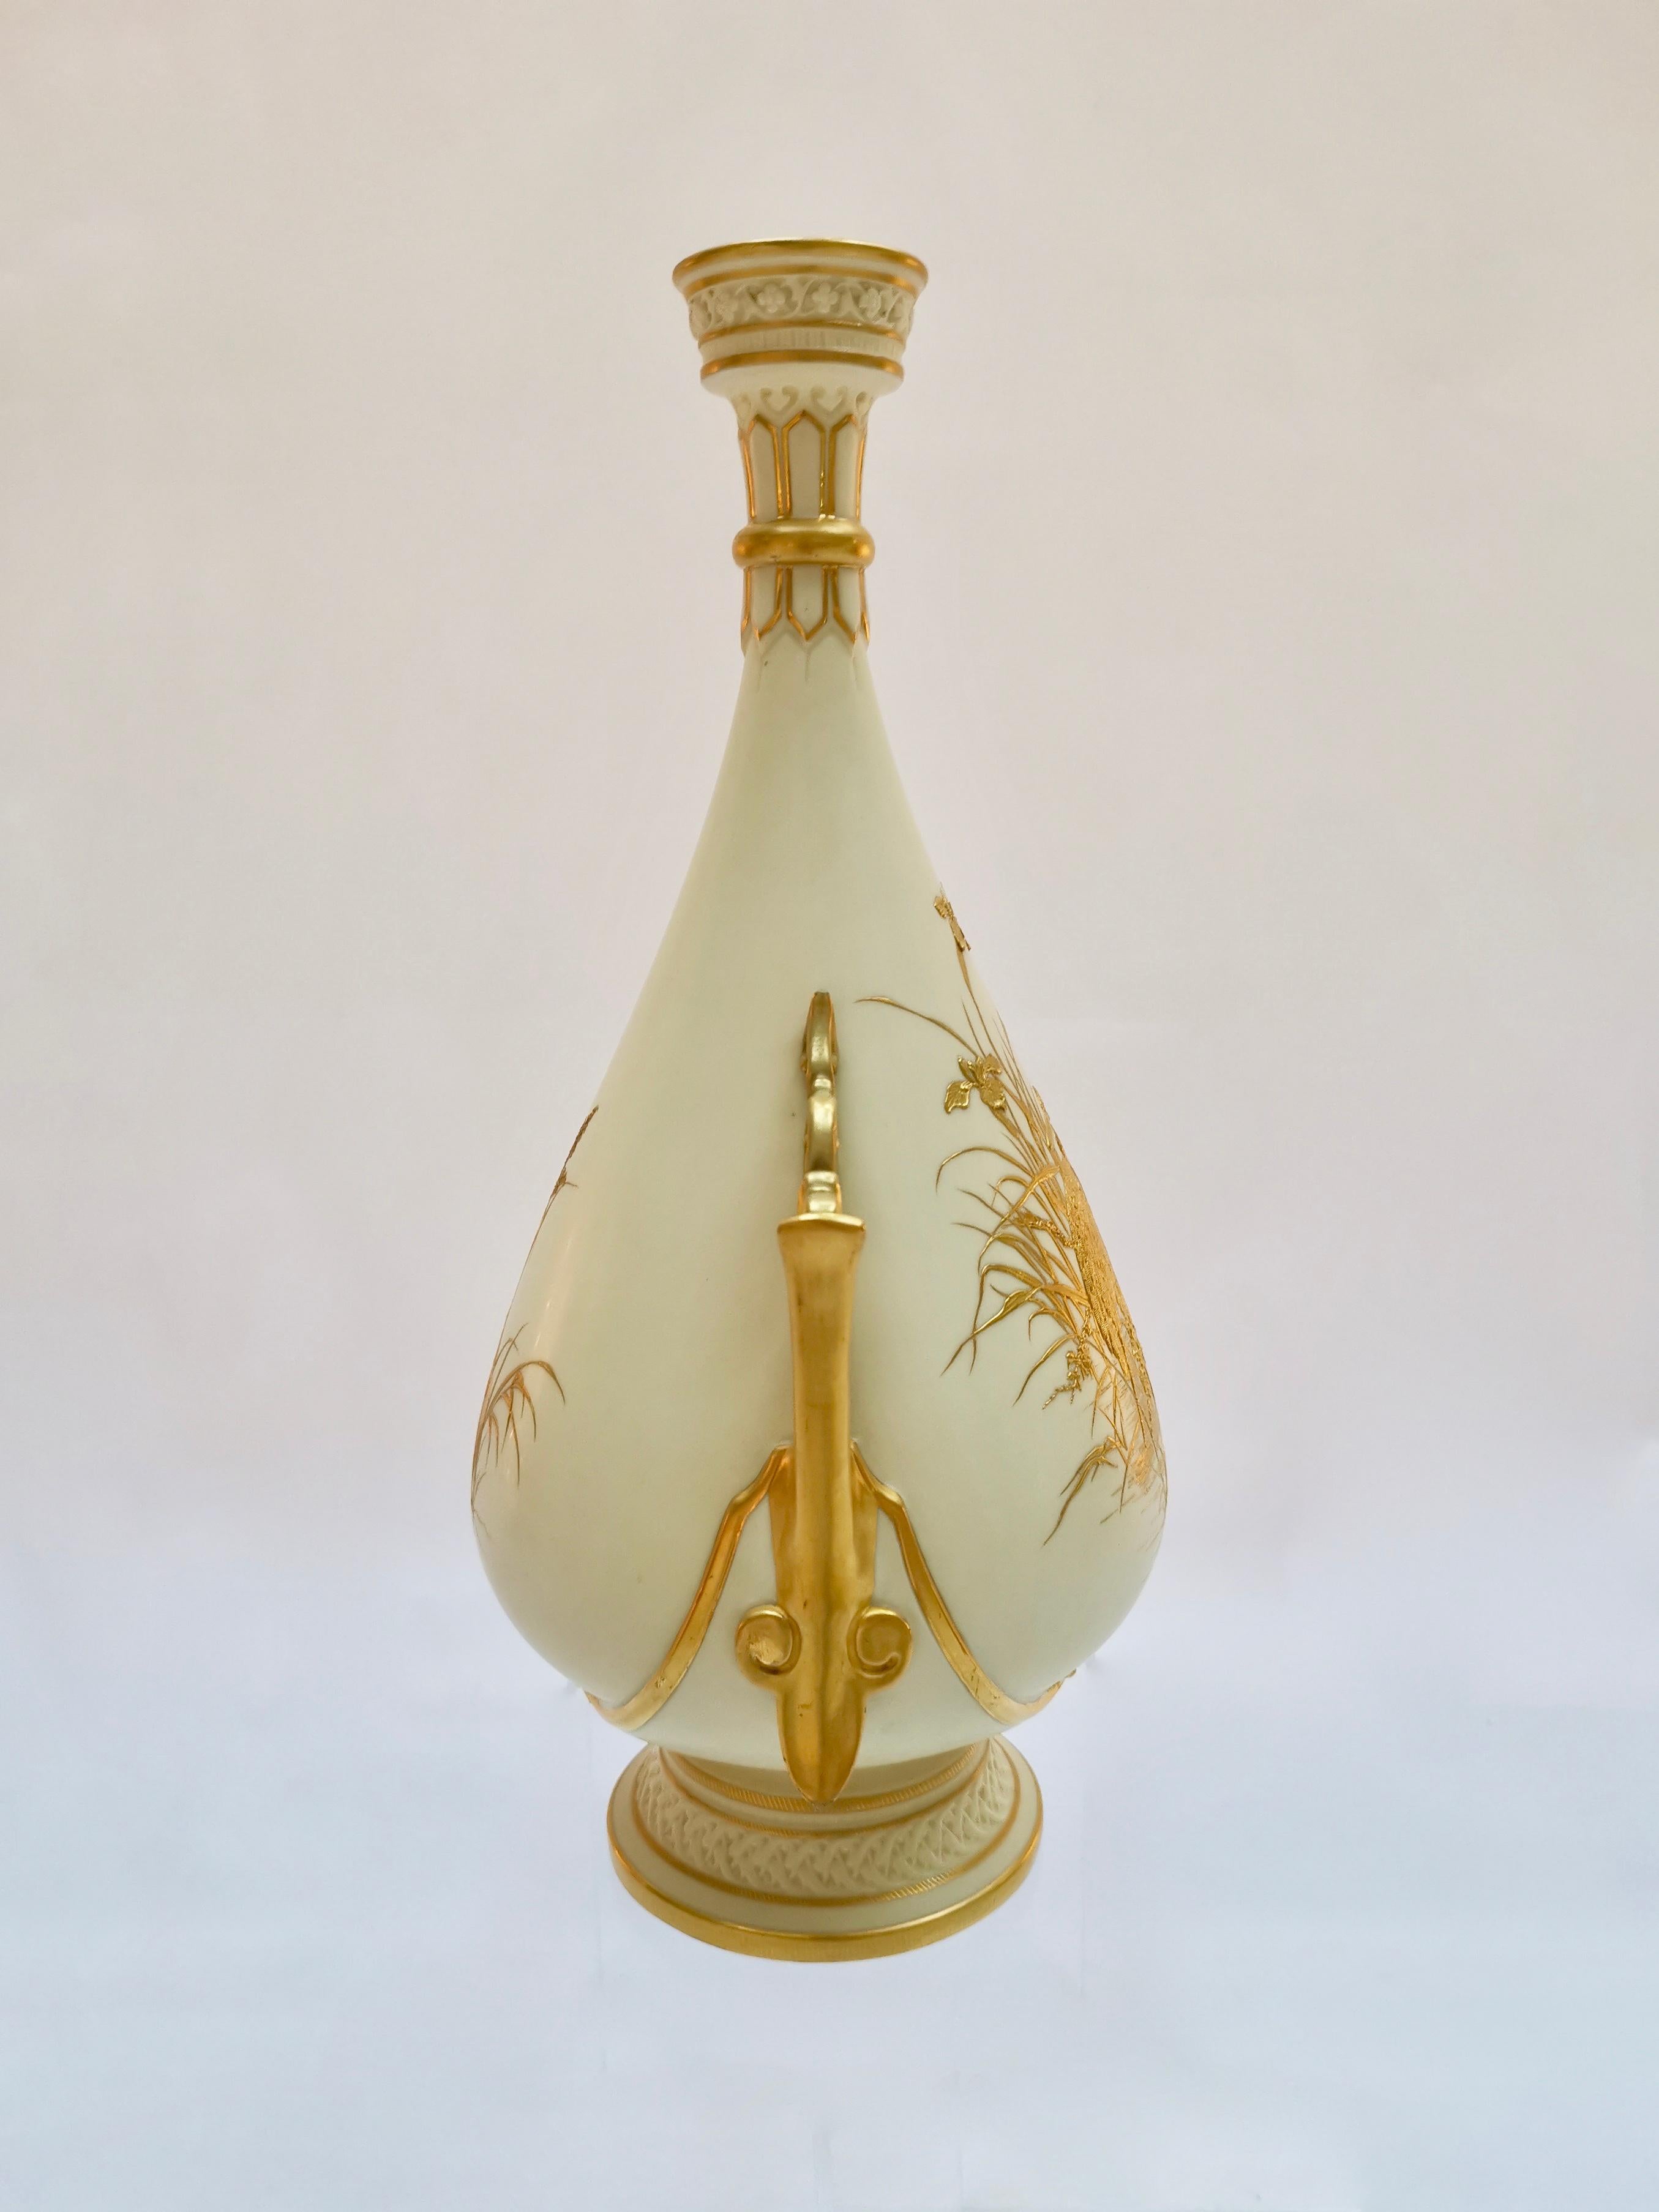 This is a superb porcelain vase made by Royal Worcester in 1889. The vase is in the Persian Revival style and has a superbly crafted chased gilt image of a spoonbill stork, decorated by Thomas Morton, a famous gilder.

The original Worcester pottery